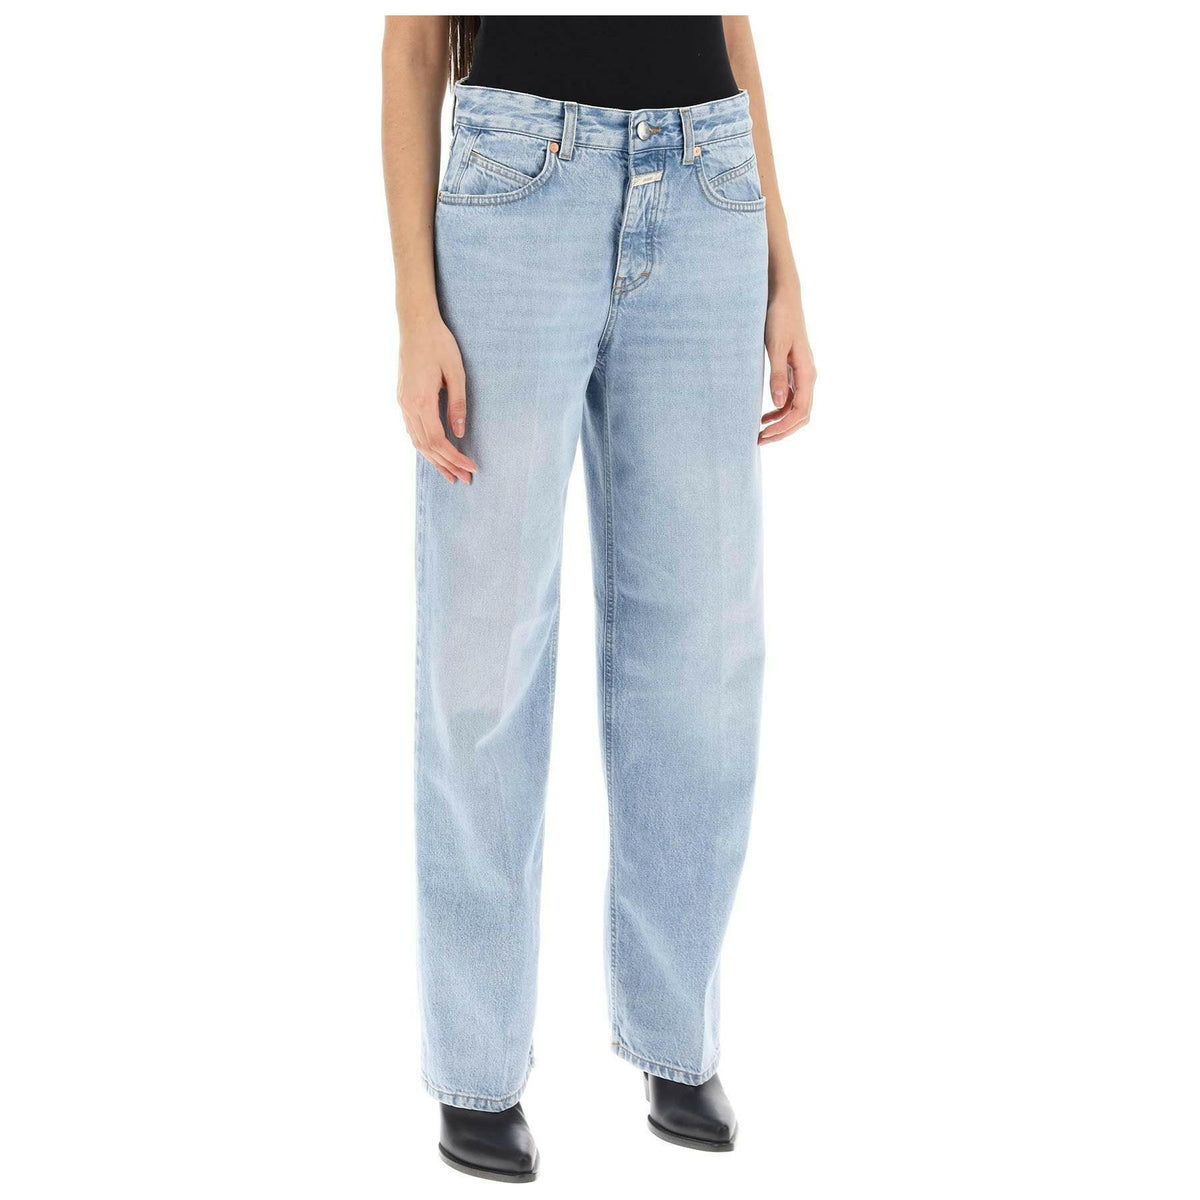 CLOSED - Loose Jeans With Tapered Cut - JOHN JULIA